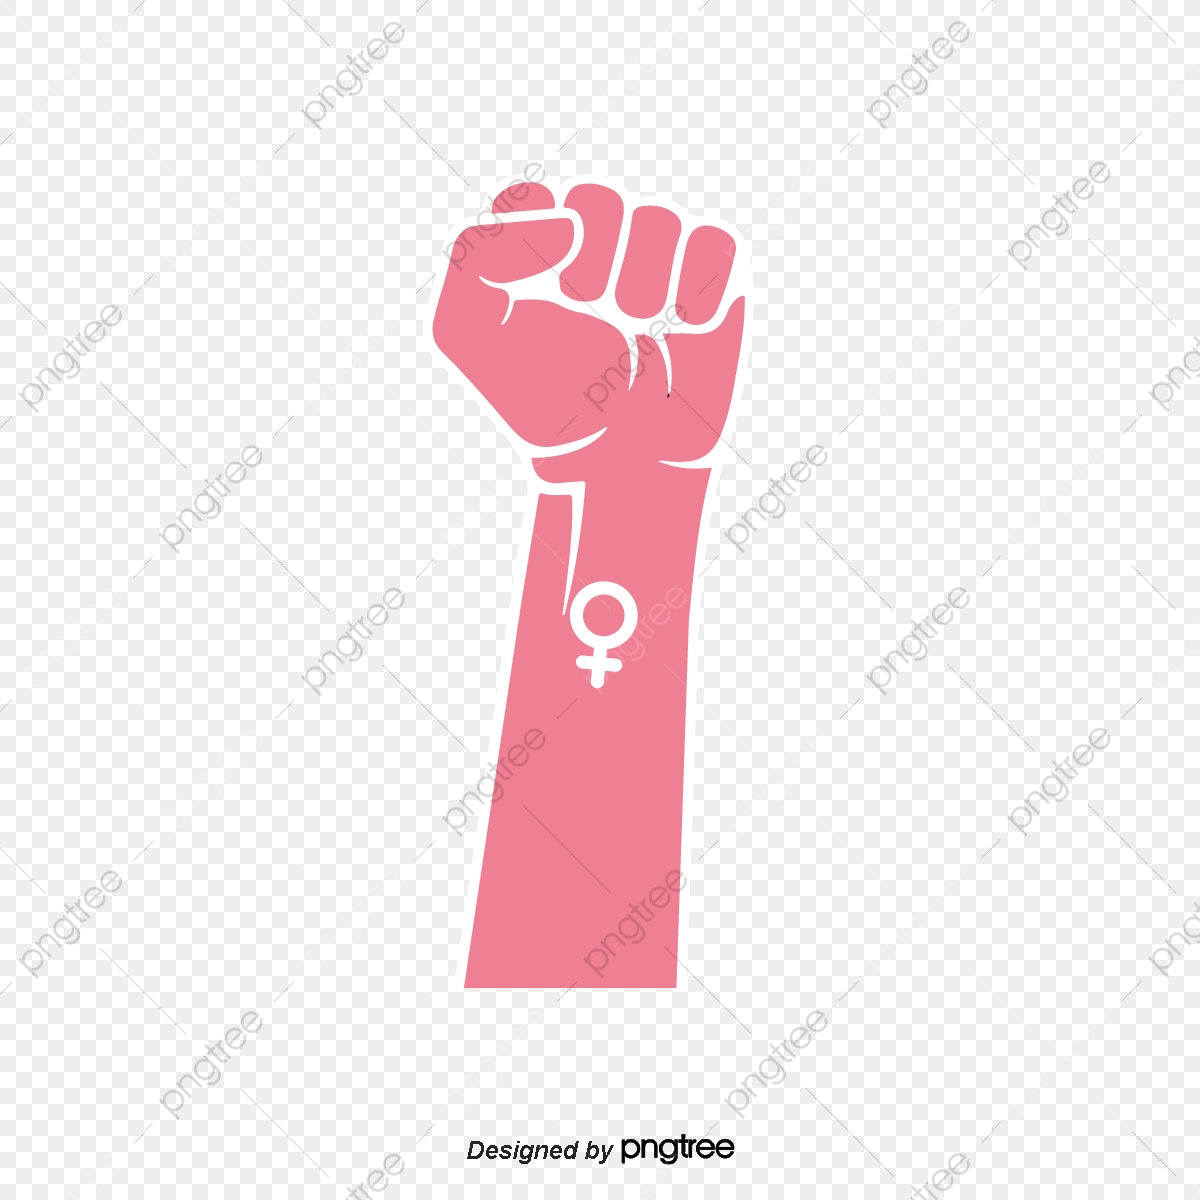 Pink vector material symbol. Fist clipart female